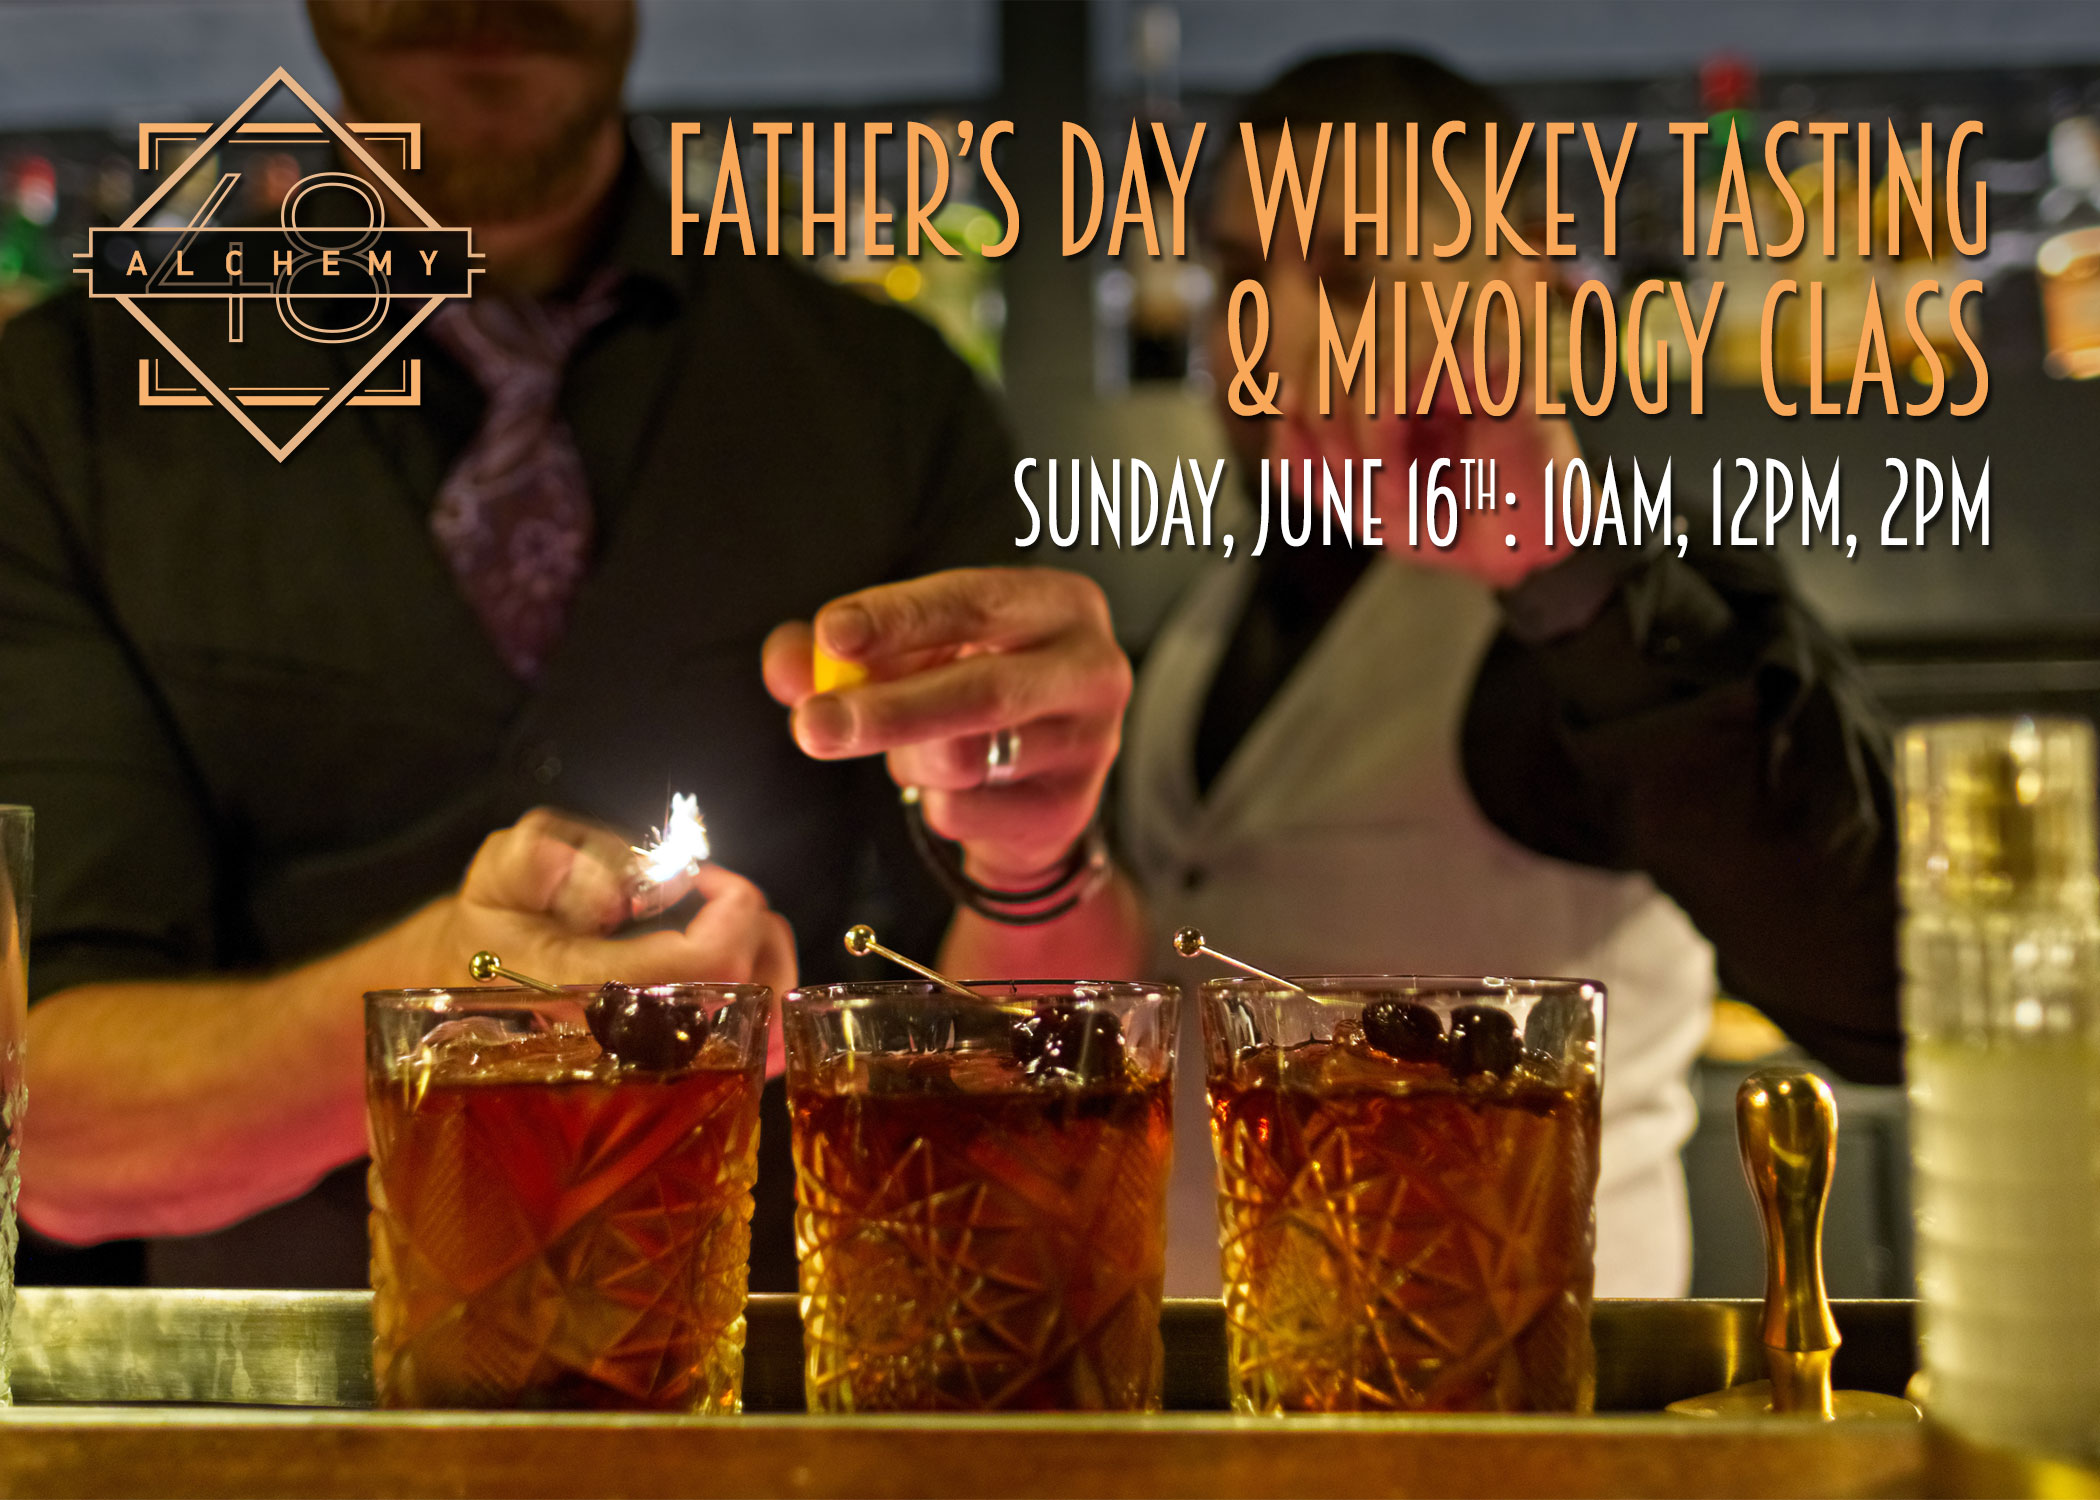 Father's Day Whiskey Tasting and Mixology Class